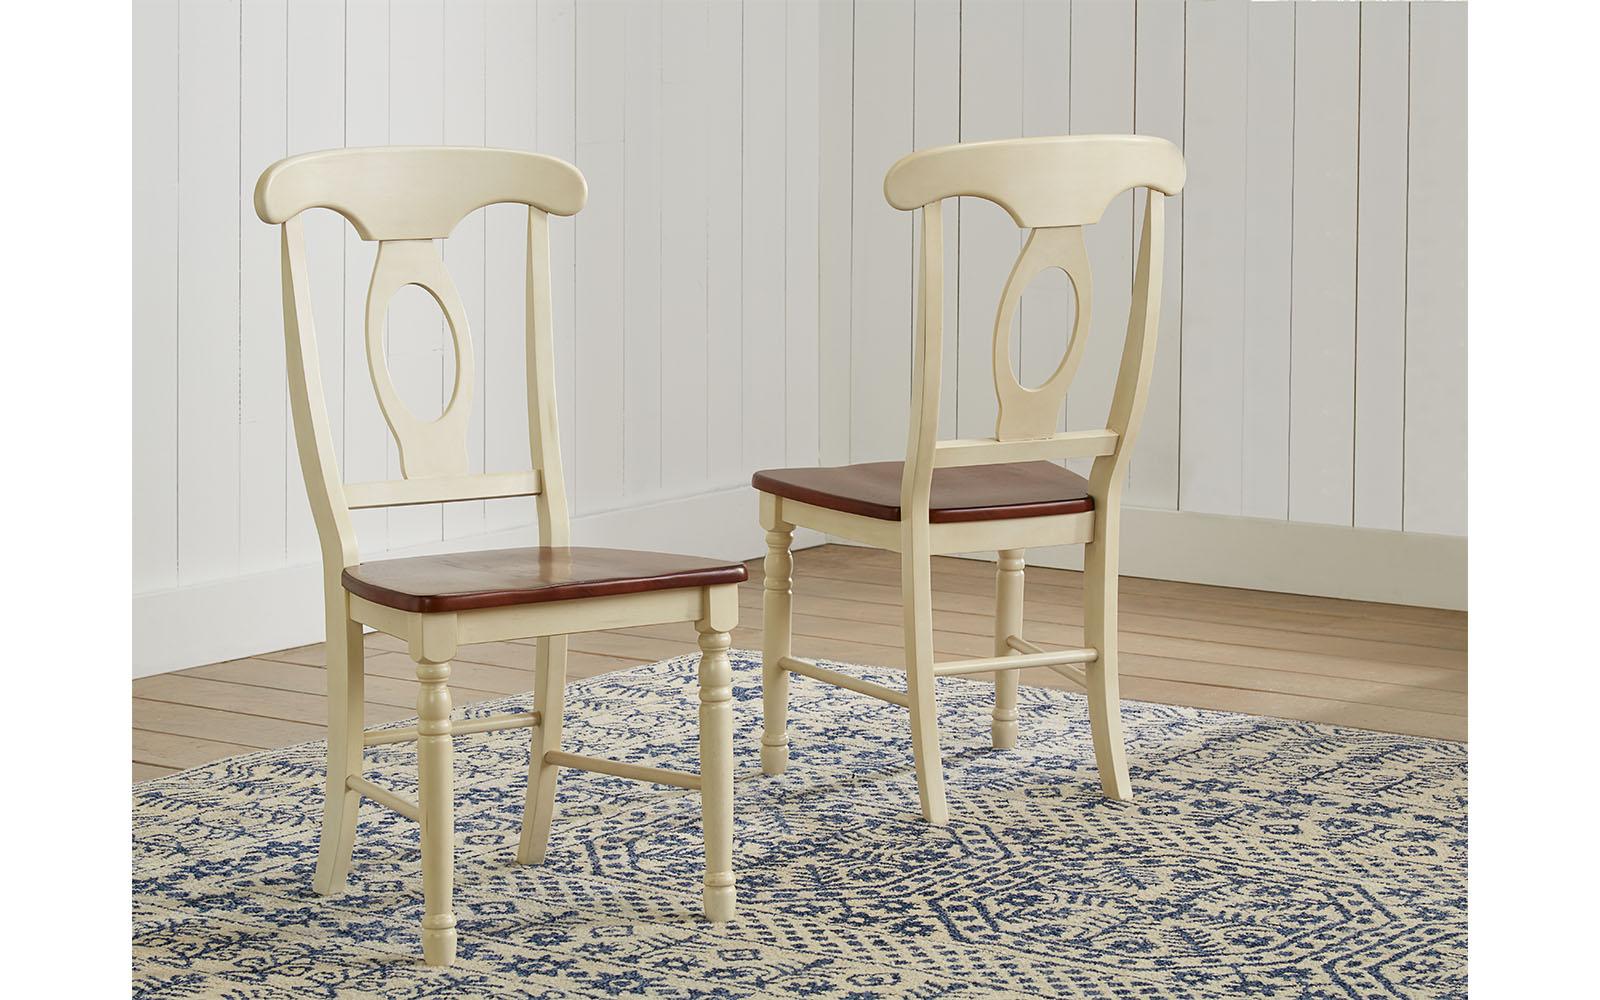 

    
A America British Isles CO Dining Table Set Brown/White BRICO6100-Set-6
